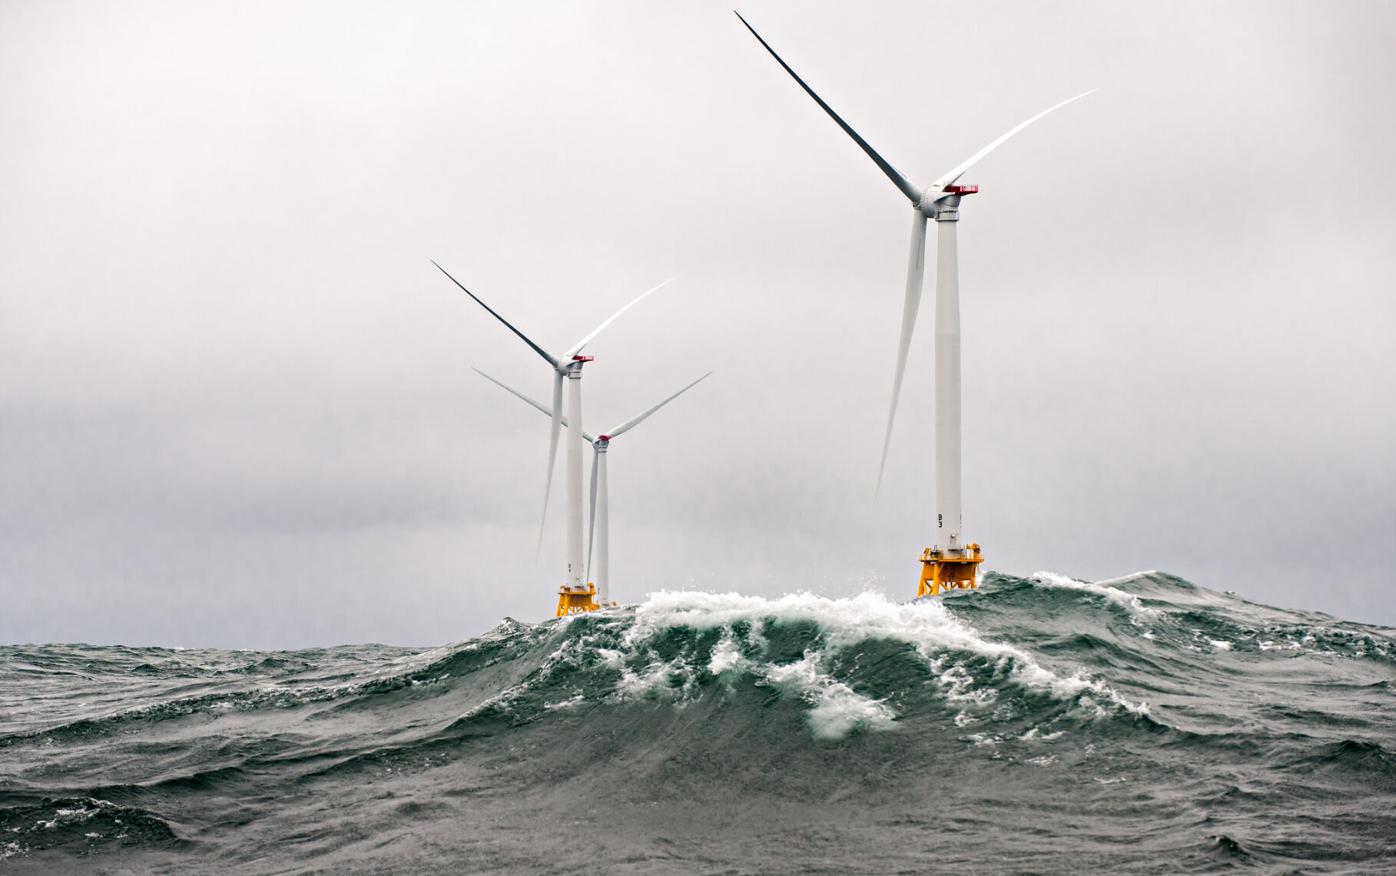 Feds slash Gulf's first offshore wind farm areas